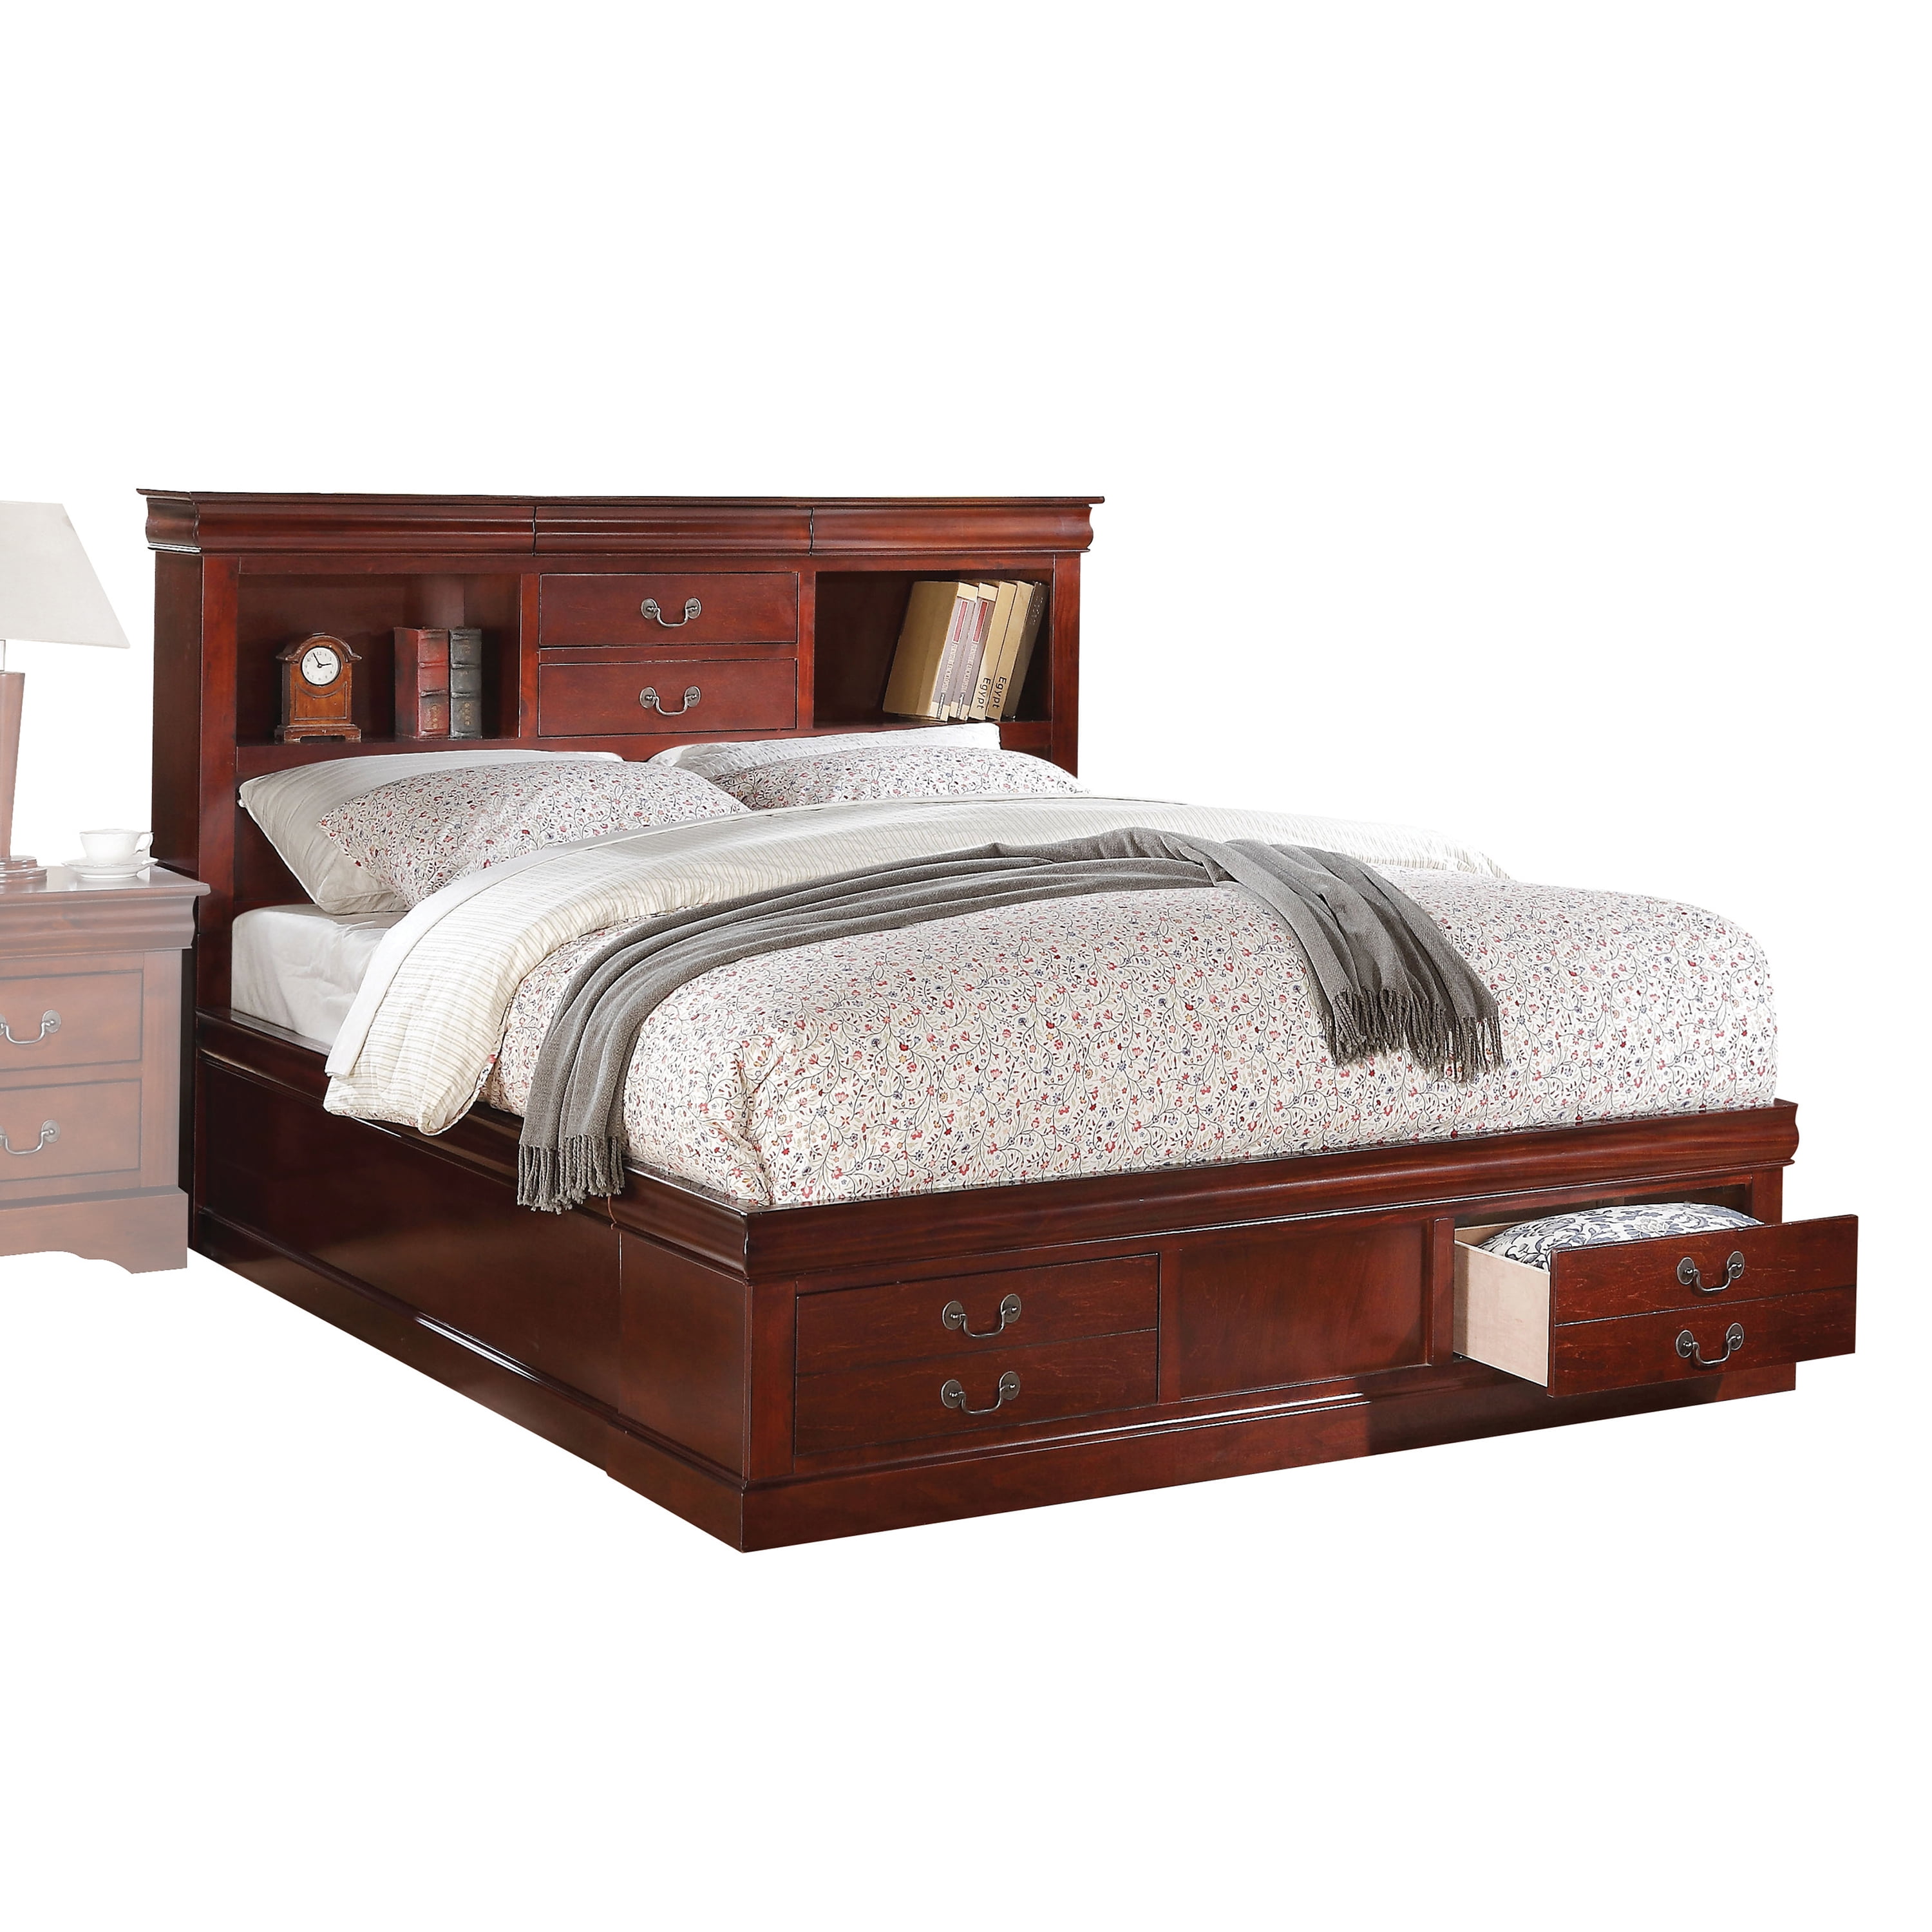 ACME Louis Philippe III Queen Bed with Storage in Cherry, Multiple Colors - 0 ...